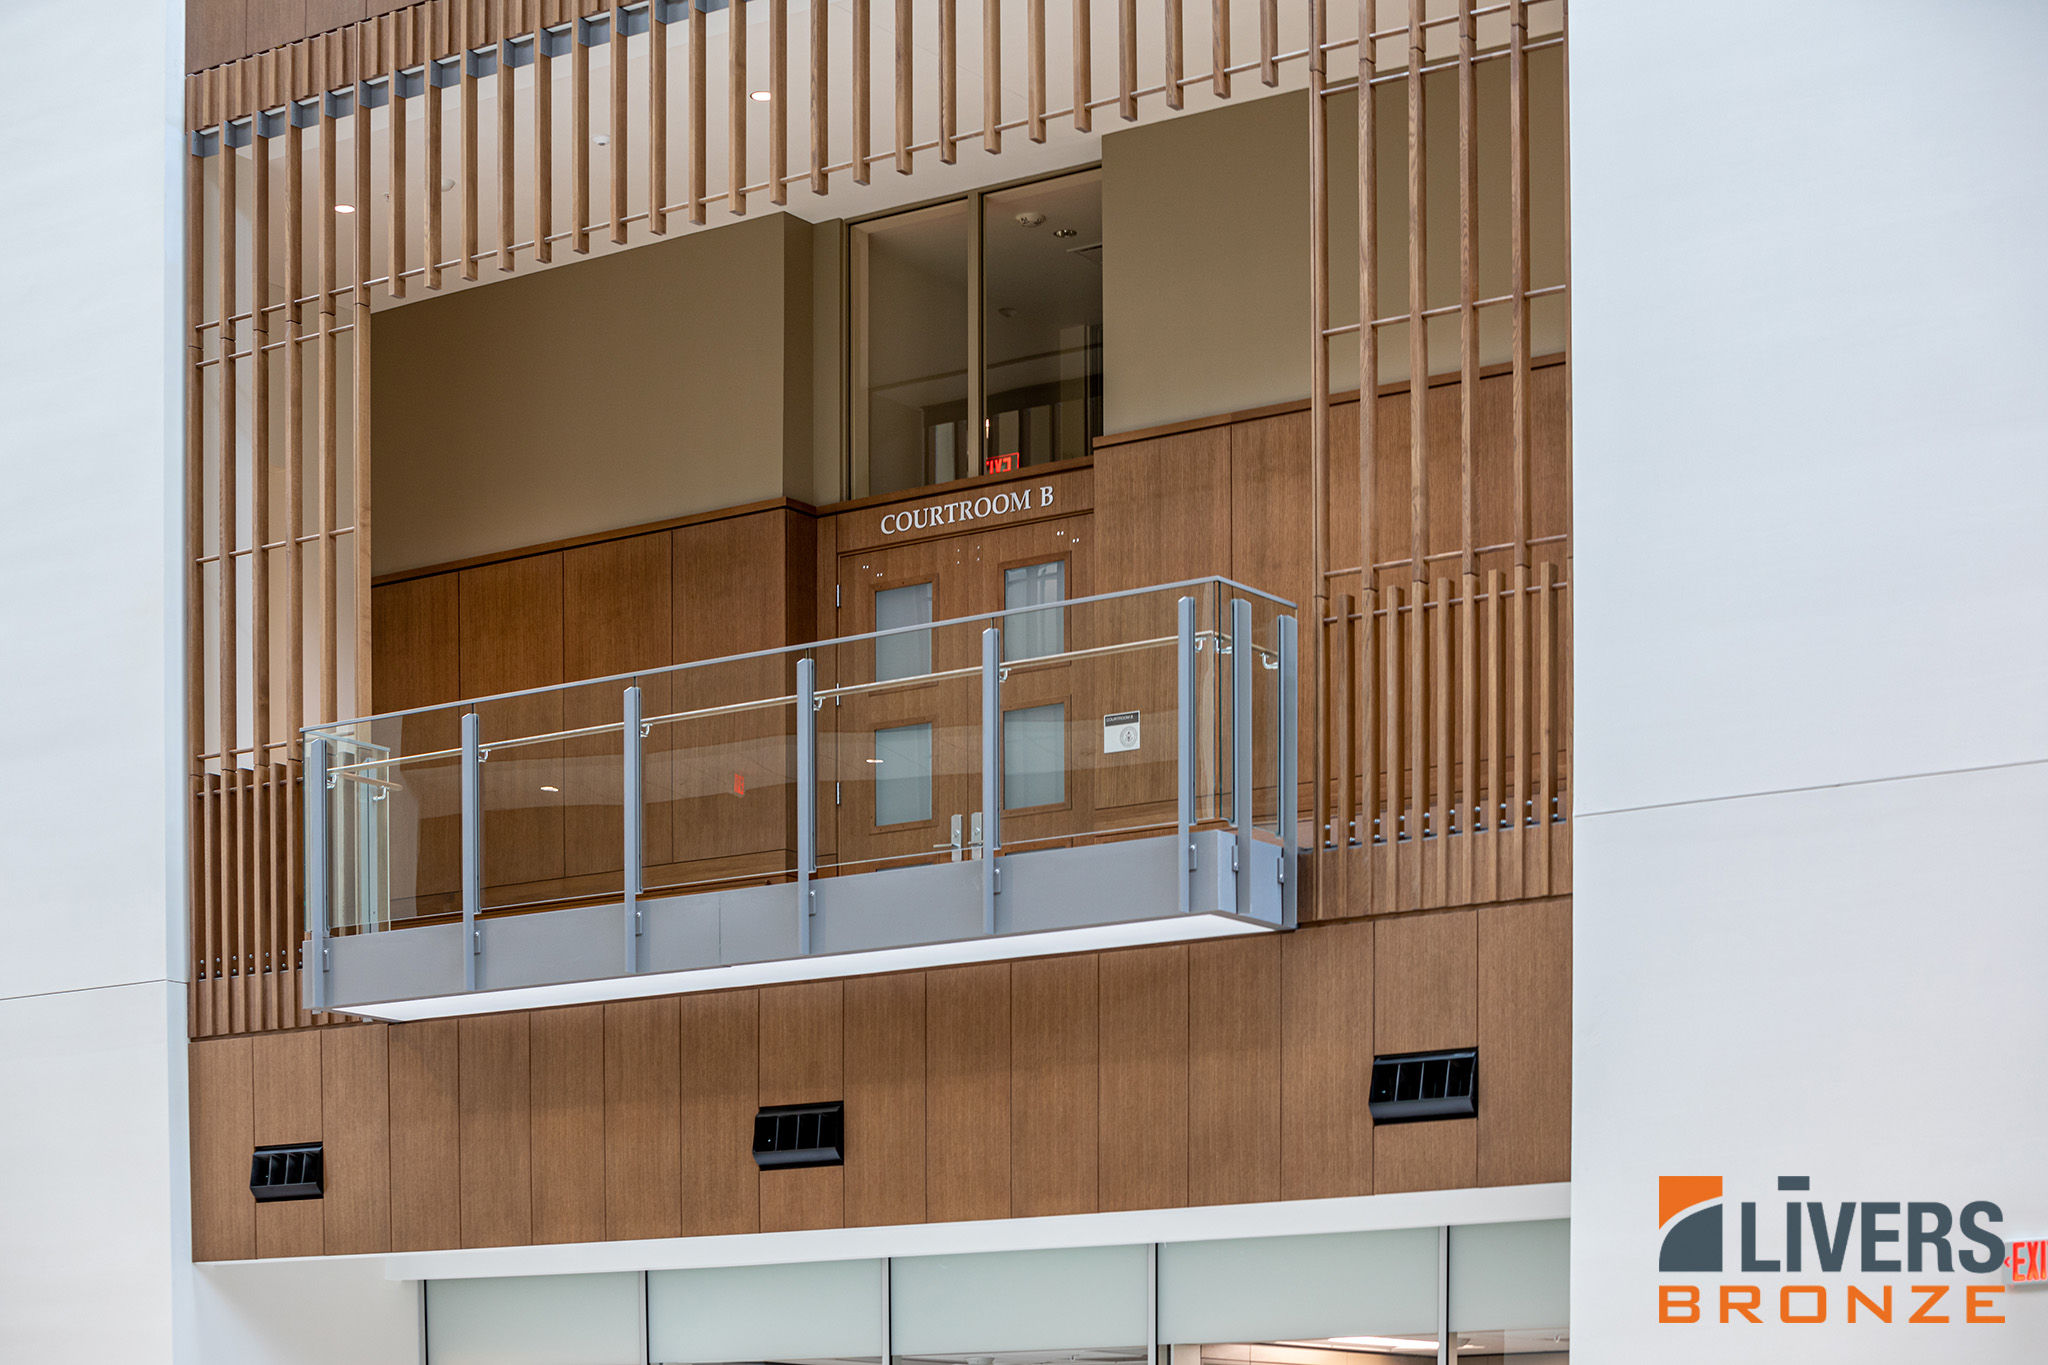 Livers Bronze Belmont Powder Coated Steel Railings were installed at the Lobby Stair and Interior Balconies at the US Court House in San Antonio Texas and were made in the USA